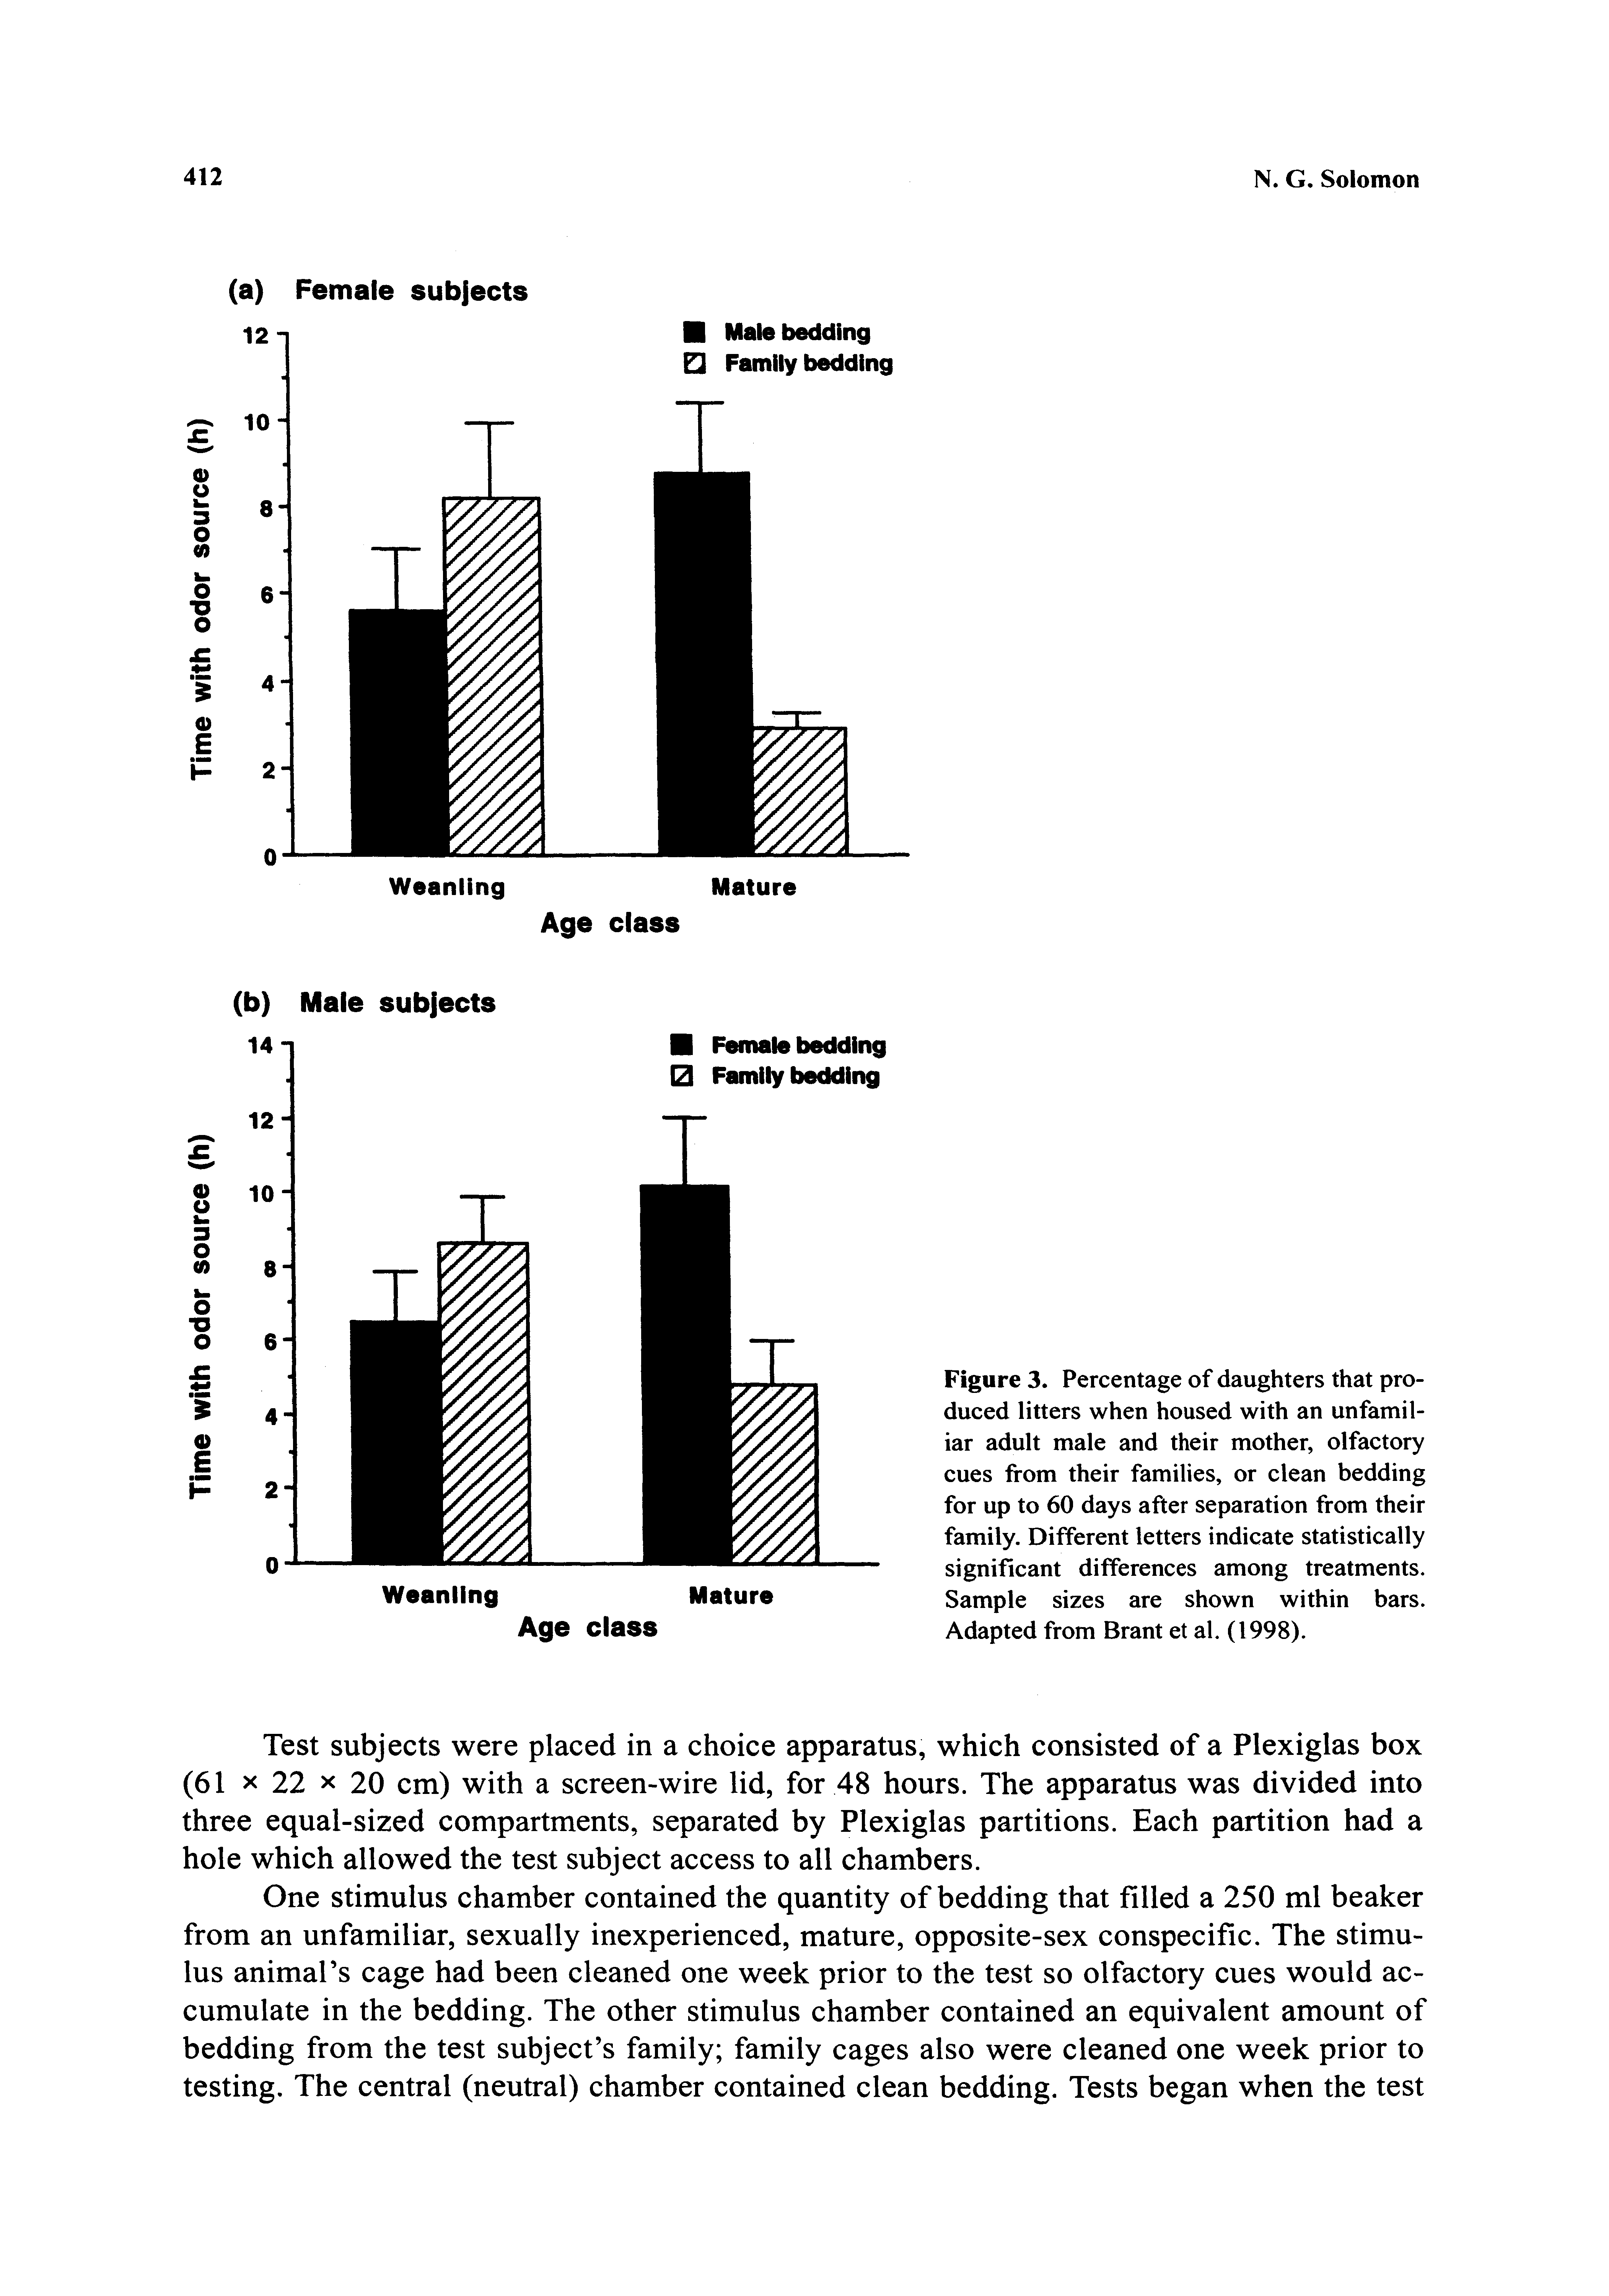 Figure 3. Percentage of daughters that produced litters when housed with an unfamiliar adult male and their mother, olfactory cues from their families, or clean bedding for up to 60 days after separation from their family. Different letters indicate statistically significant differences among treatments. Sample sizes are shown within bars. Adapted from Brant et al. (1998).